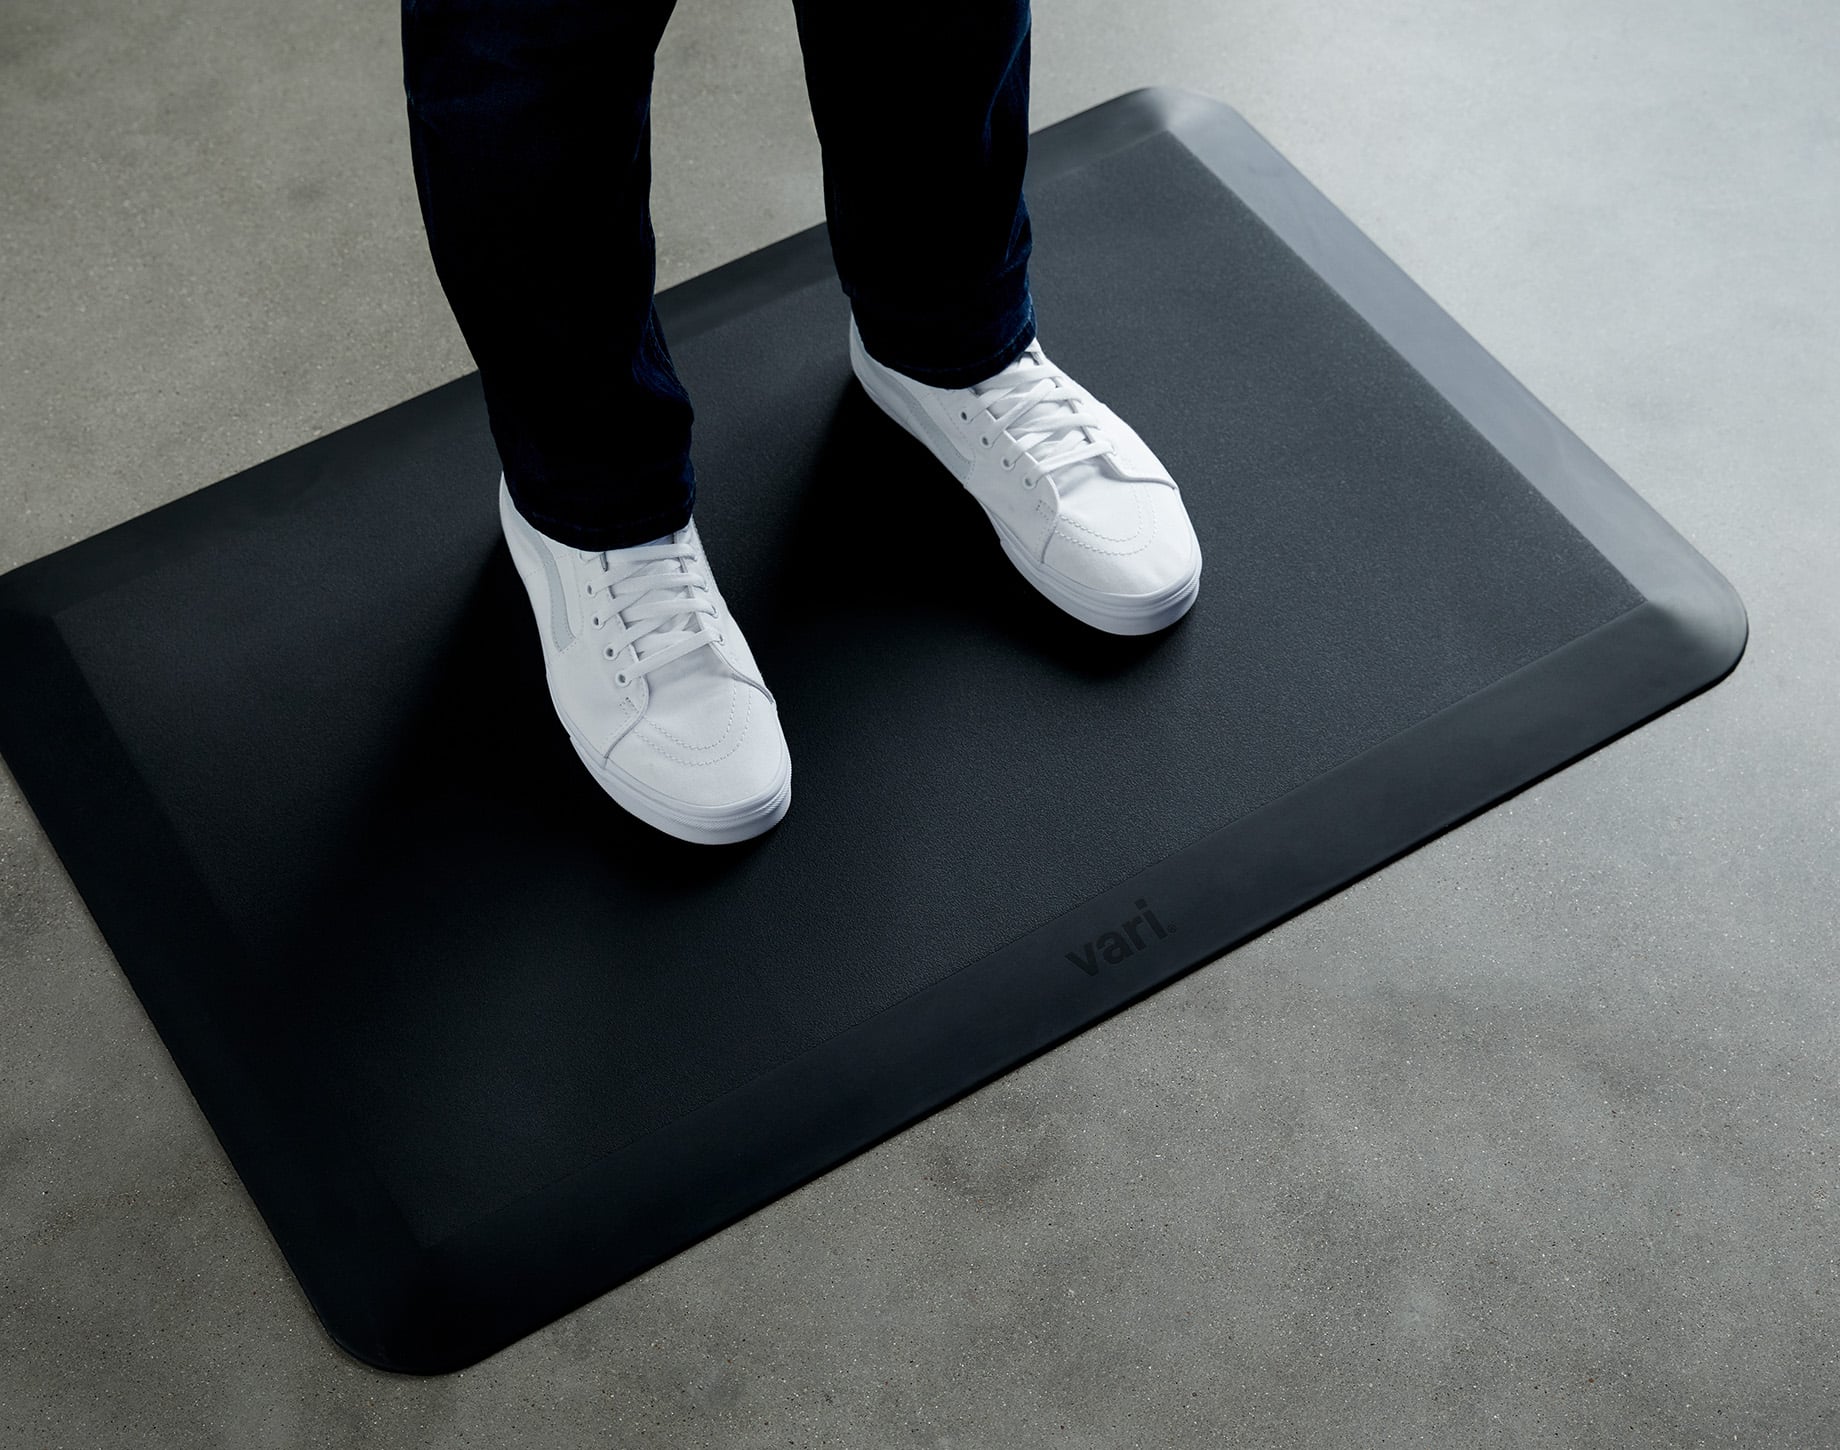 two feet on a standing mat in sneakers